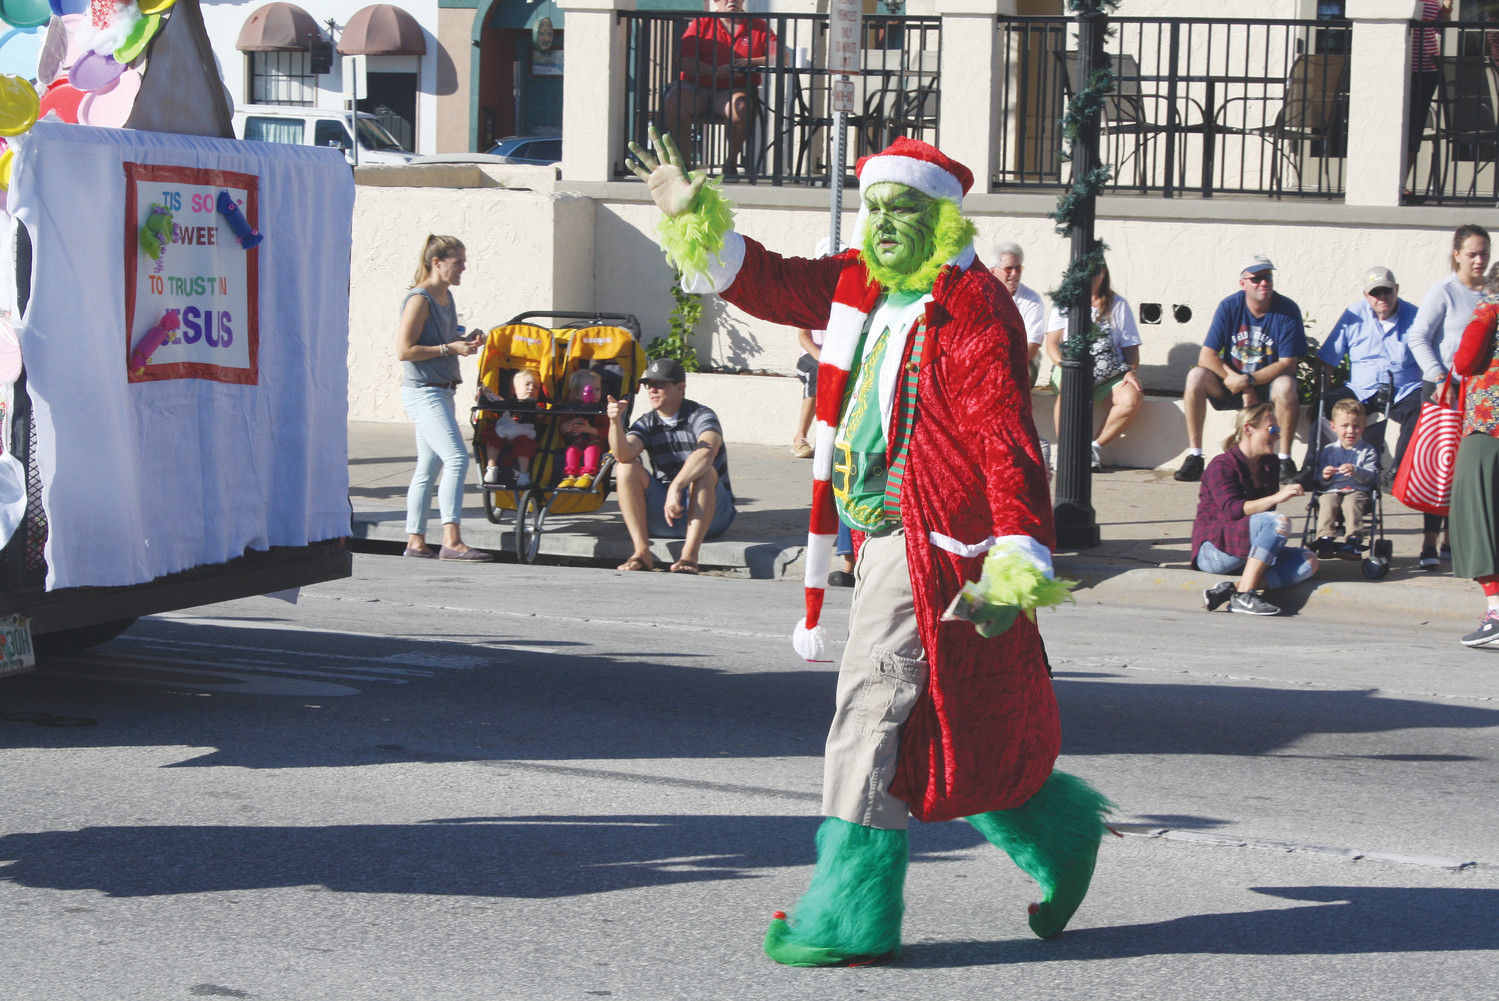 The Grinch makes an appearance at the parade.